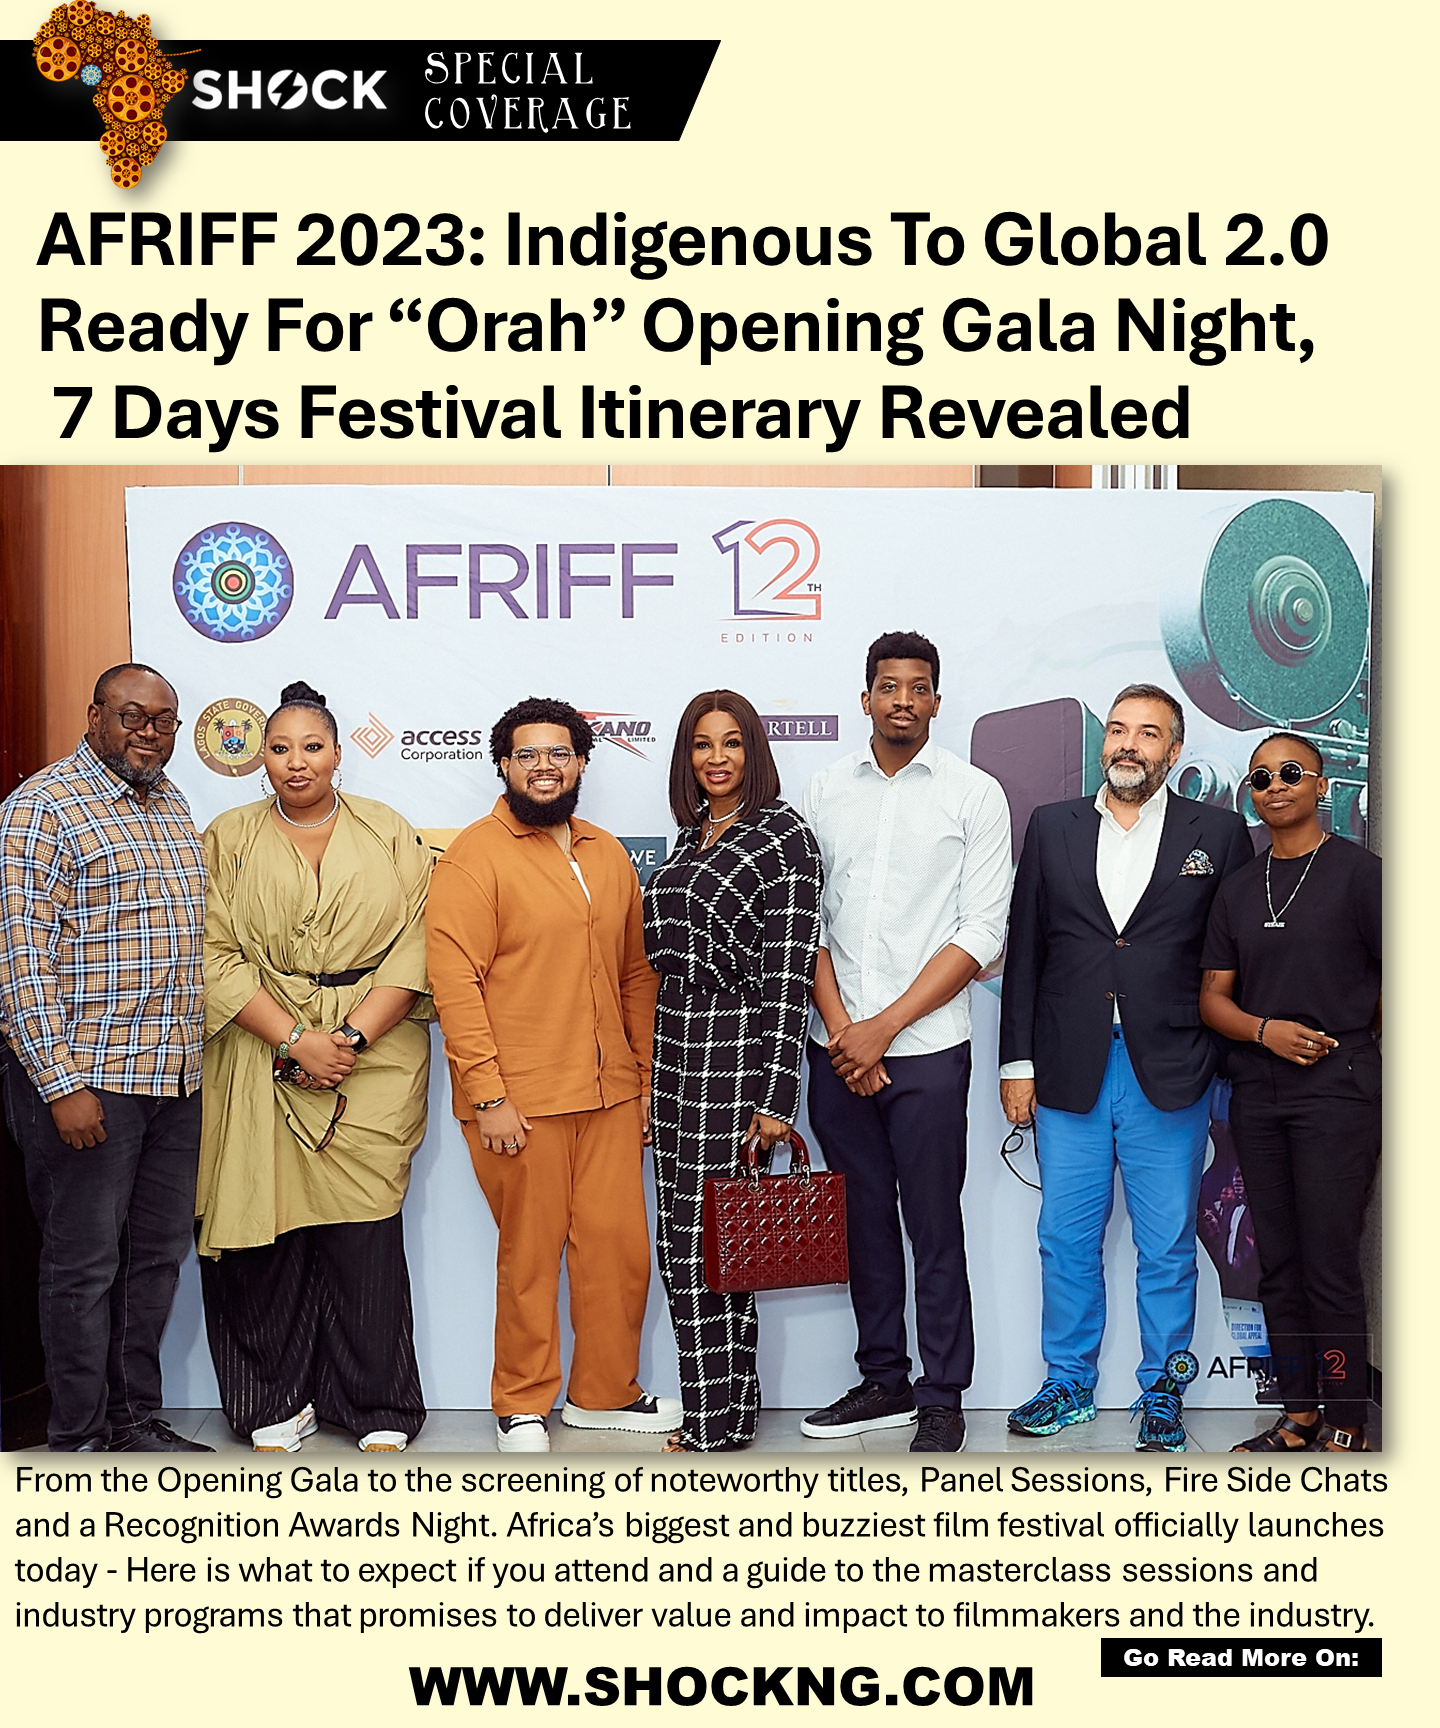 AFRIFF 2023 Organizers and sessions - AFRIFF 2023: Indigenous To Global 2.0 Ready For “Orah” Opening Gala Night